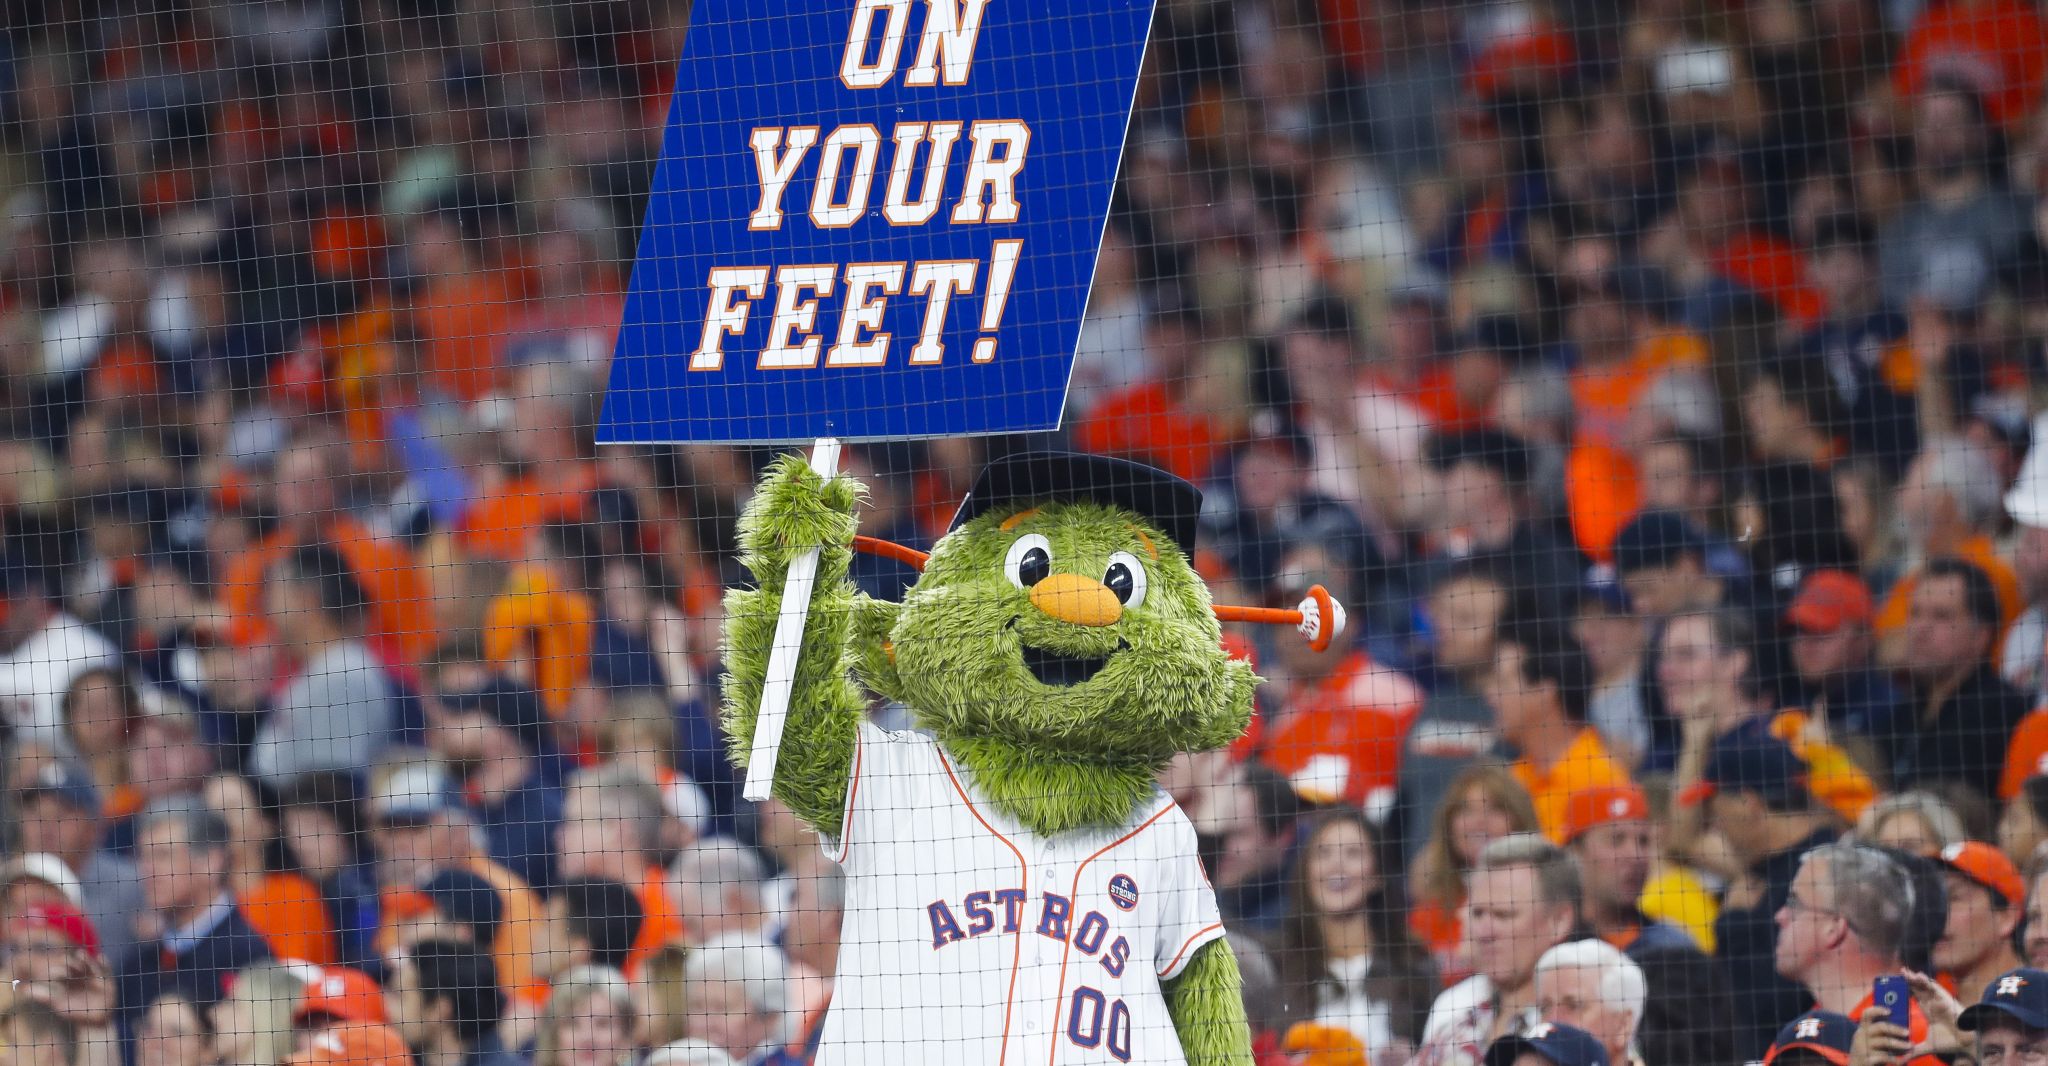 Orbit Has Likely Returned To Houston As The Astros' Mascot - The